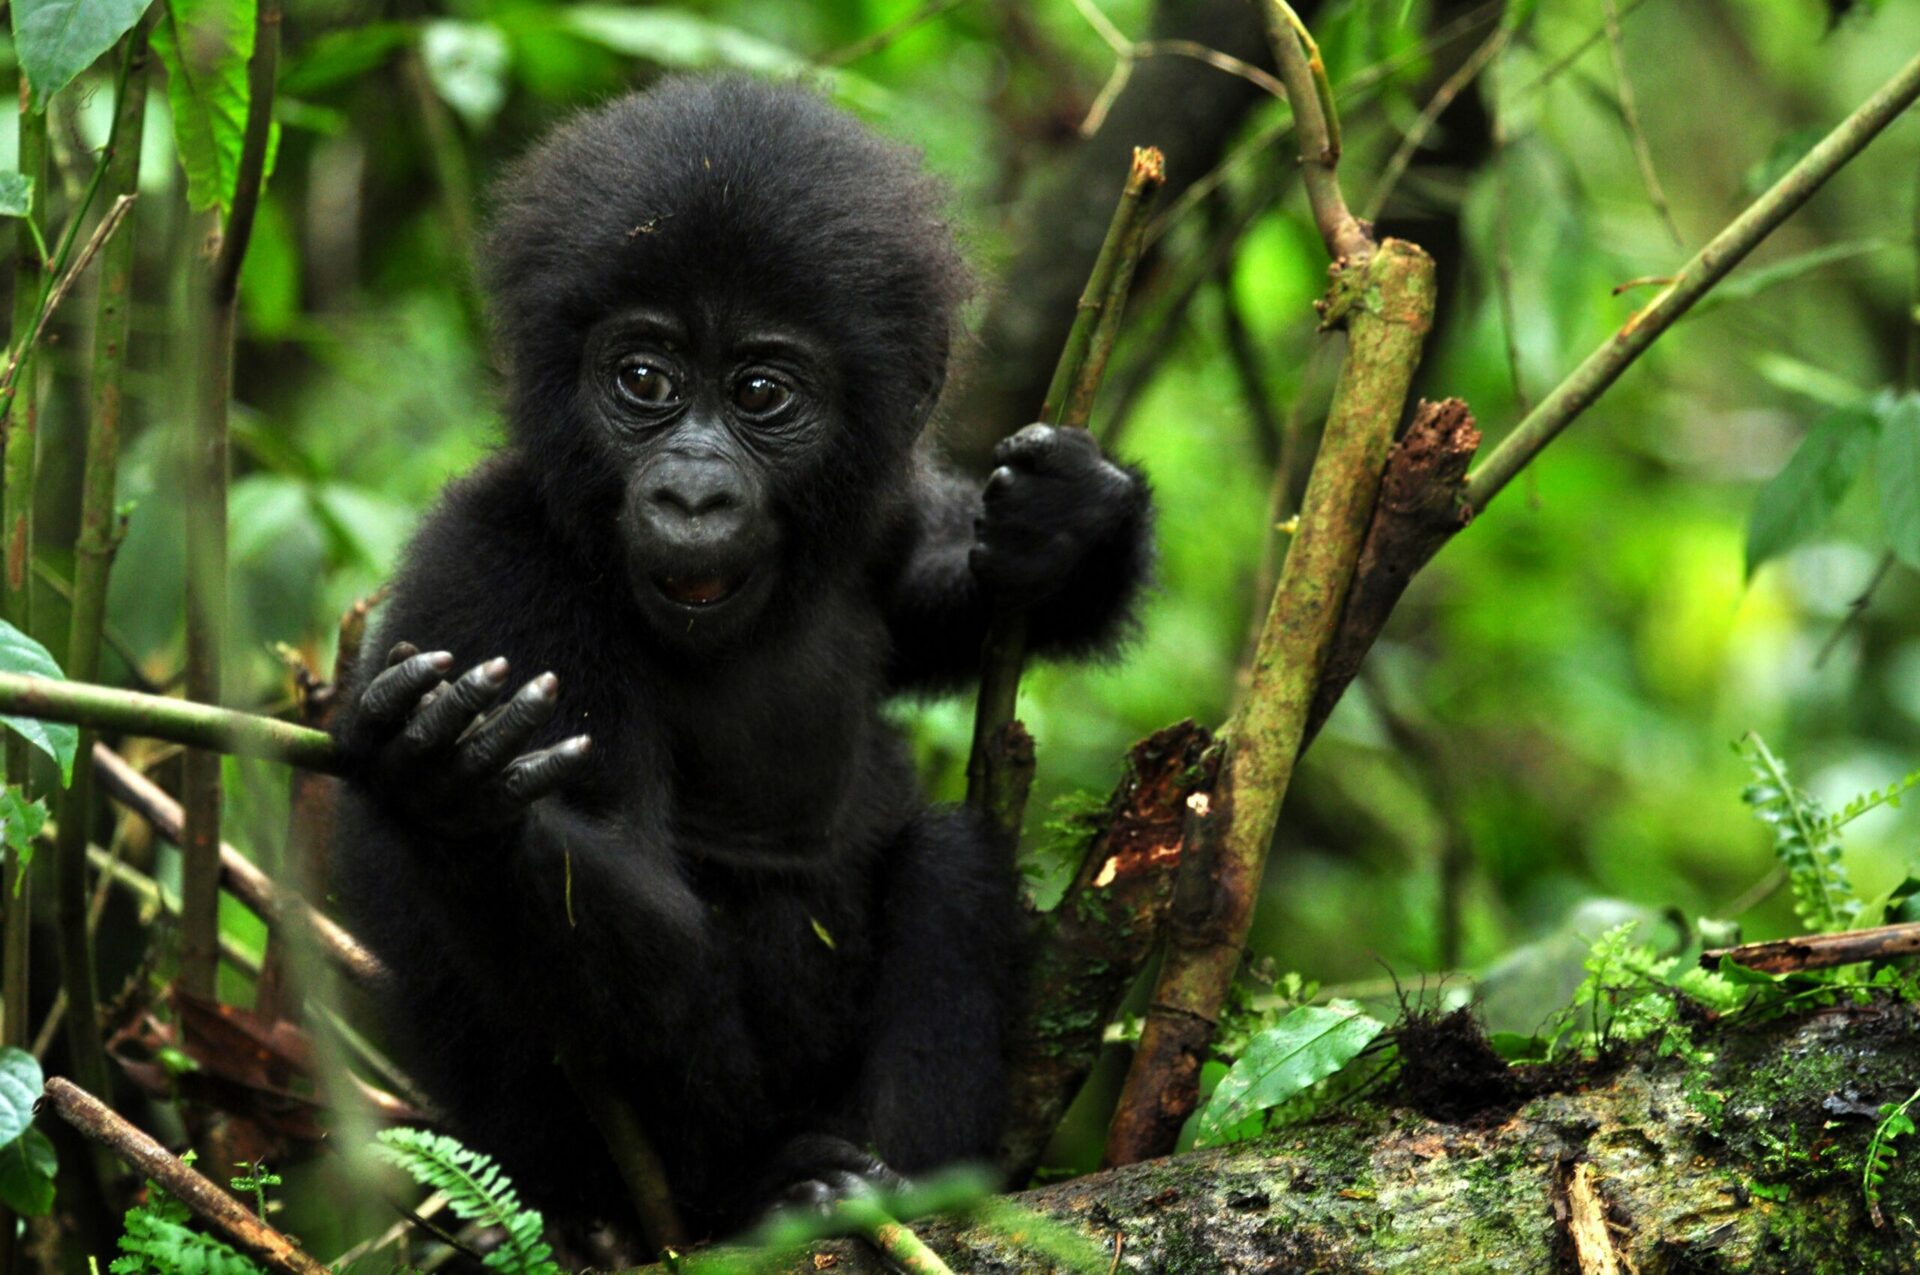 Baby Gorilla in a tree looking at the camera